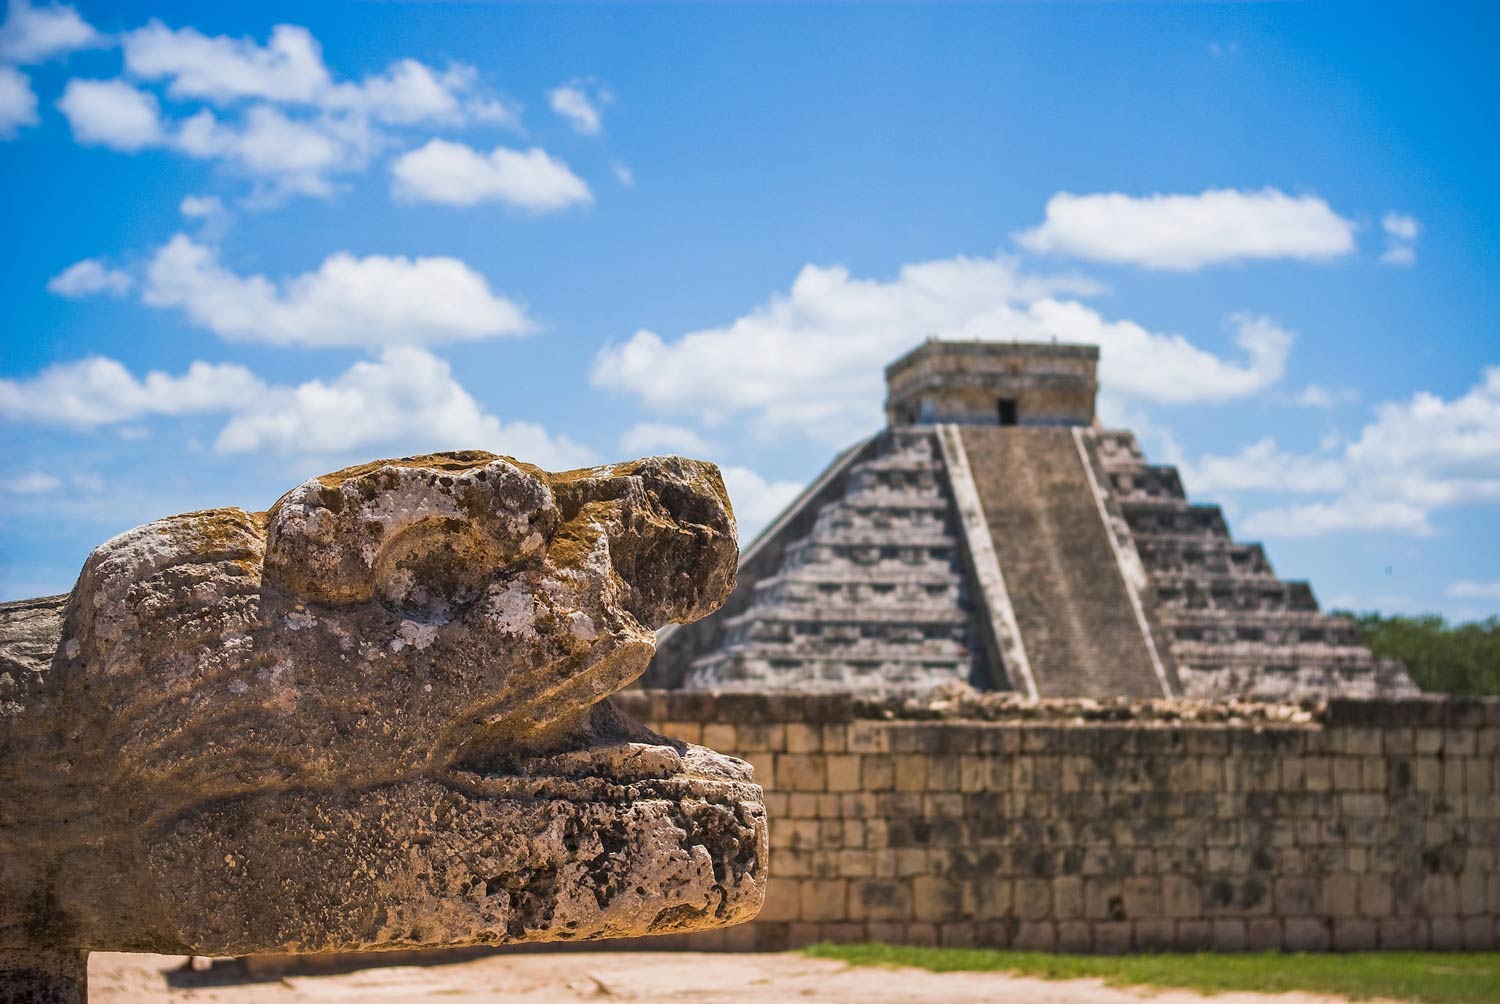 Disrespectful Tourist Gets Booed and Fined For Climbing Ancient Mayan Temple In Mexico